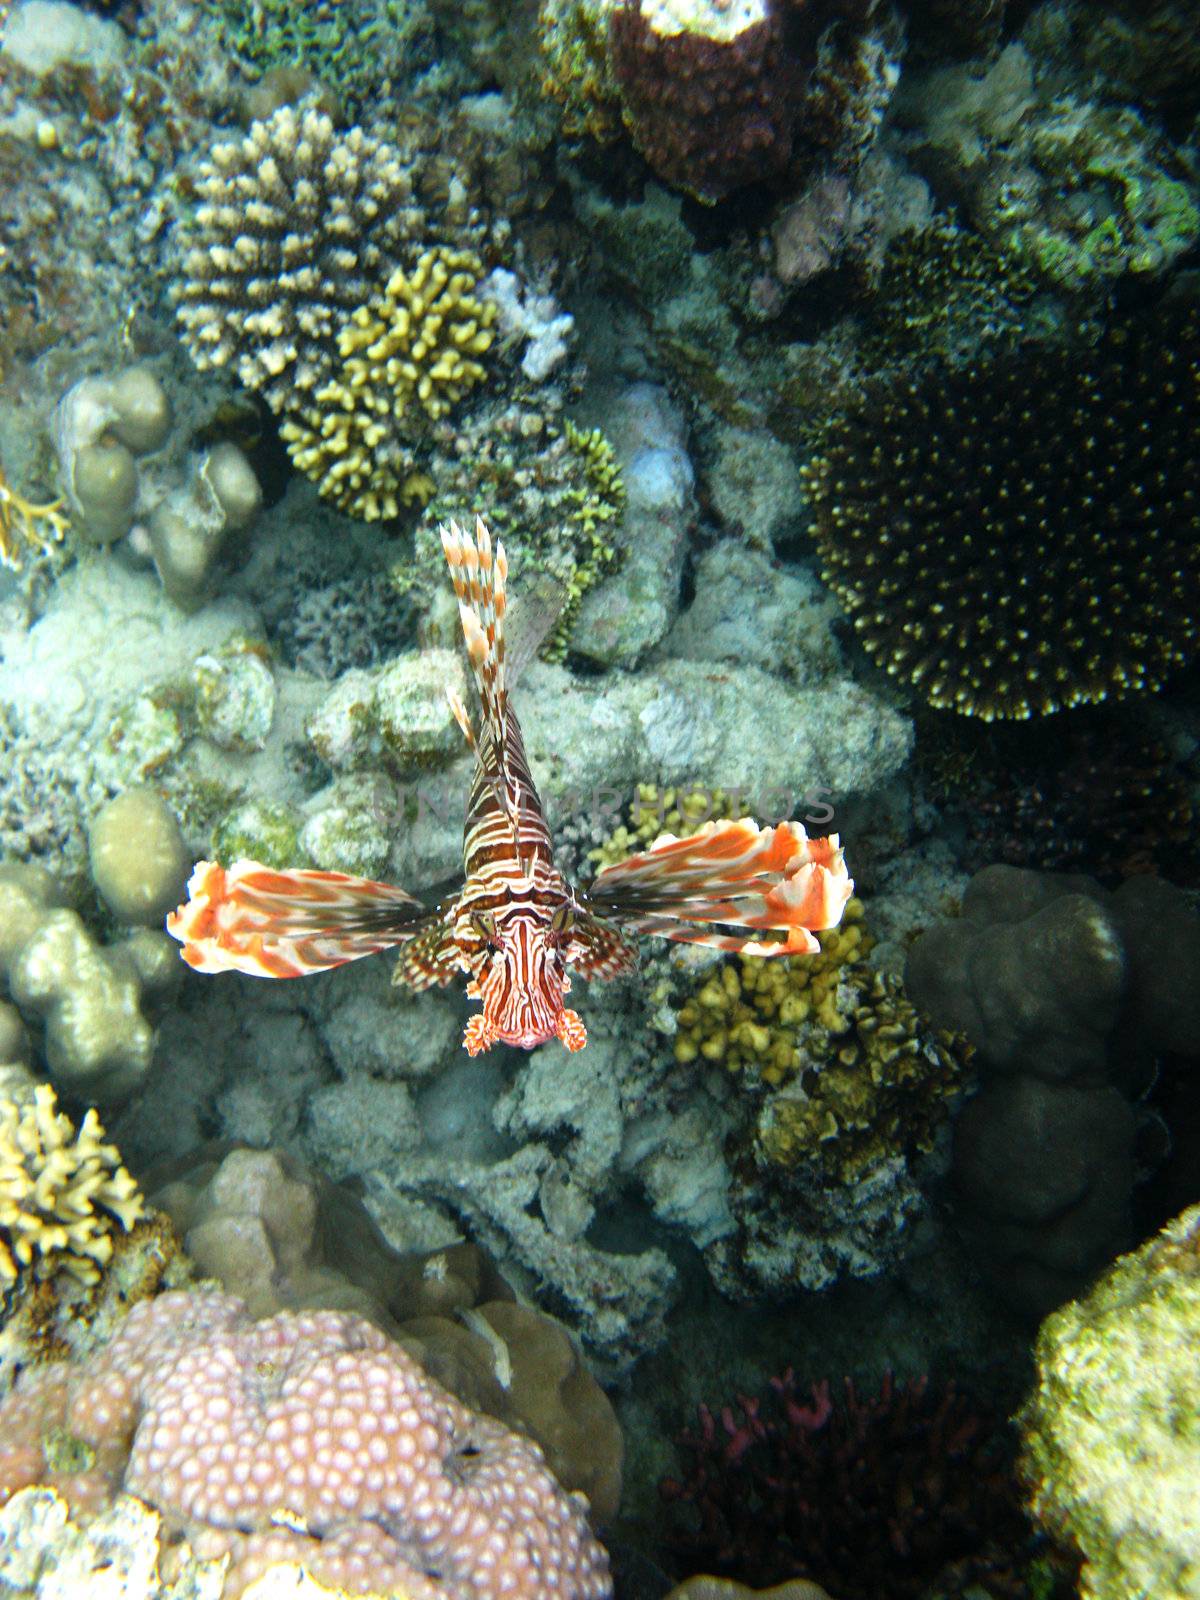 Red lionfish and coral reef in Red sea